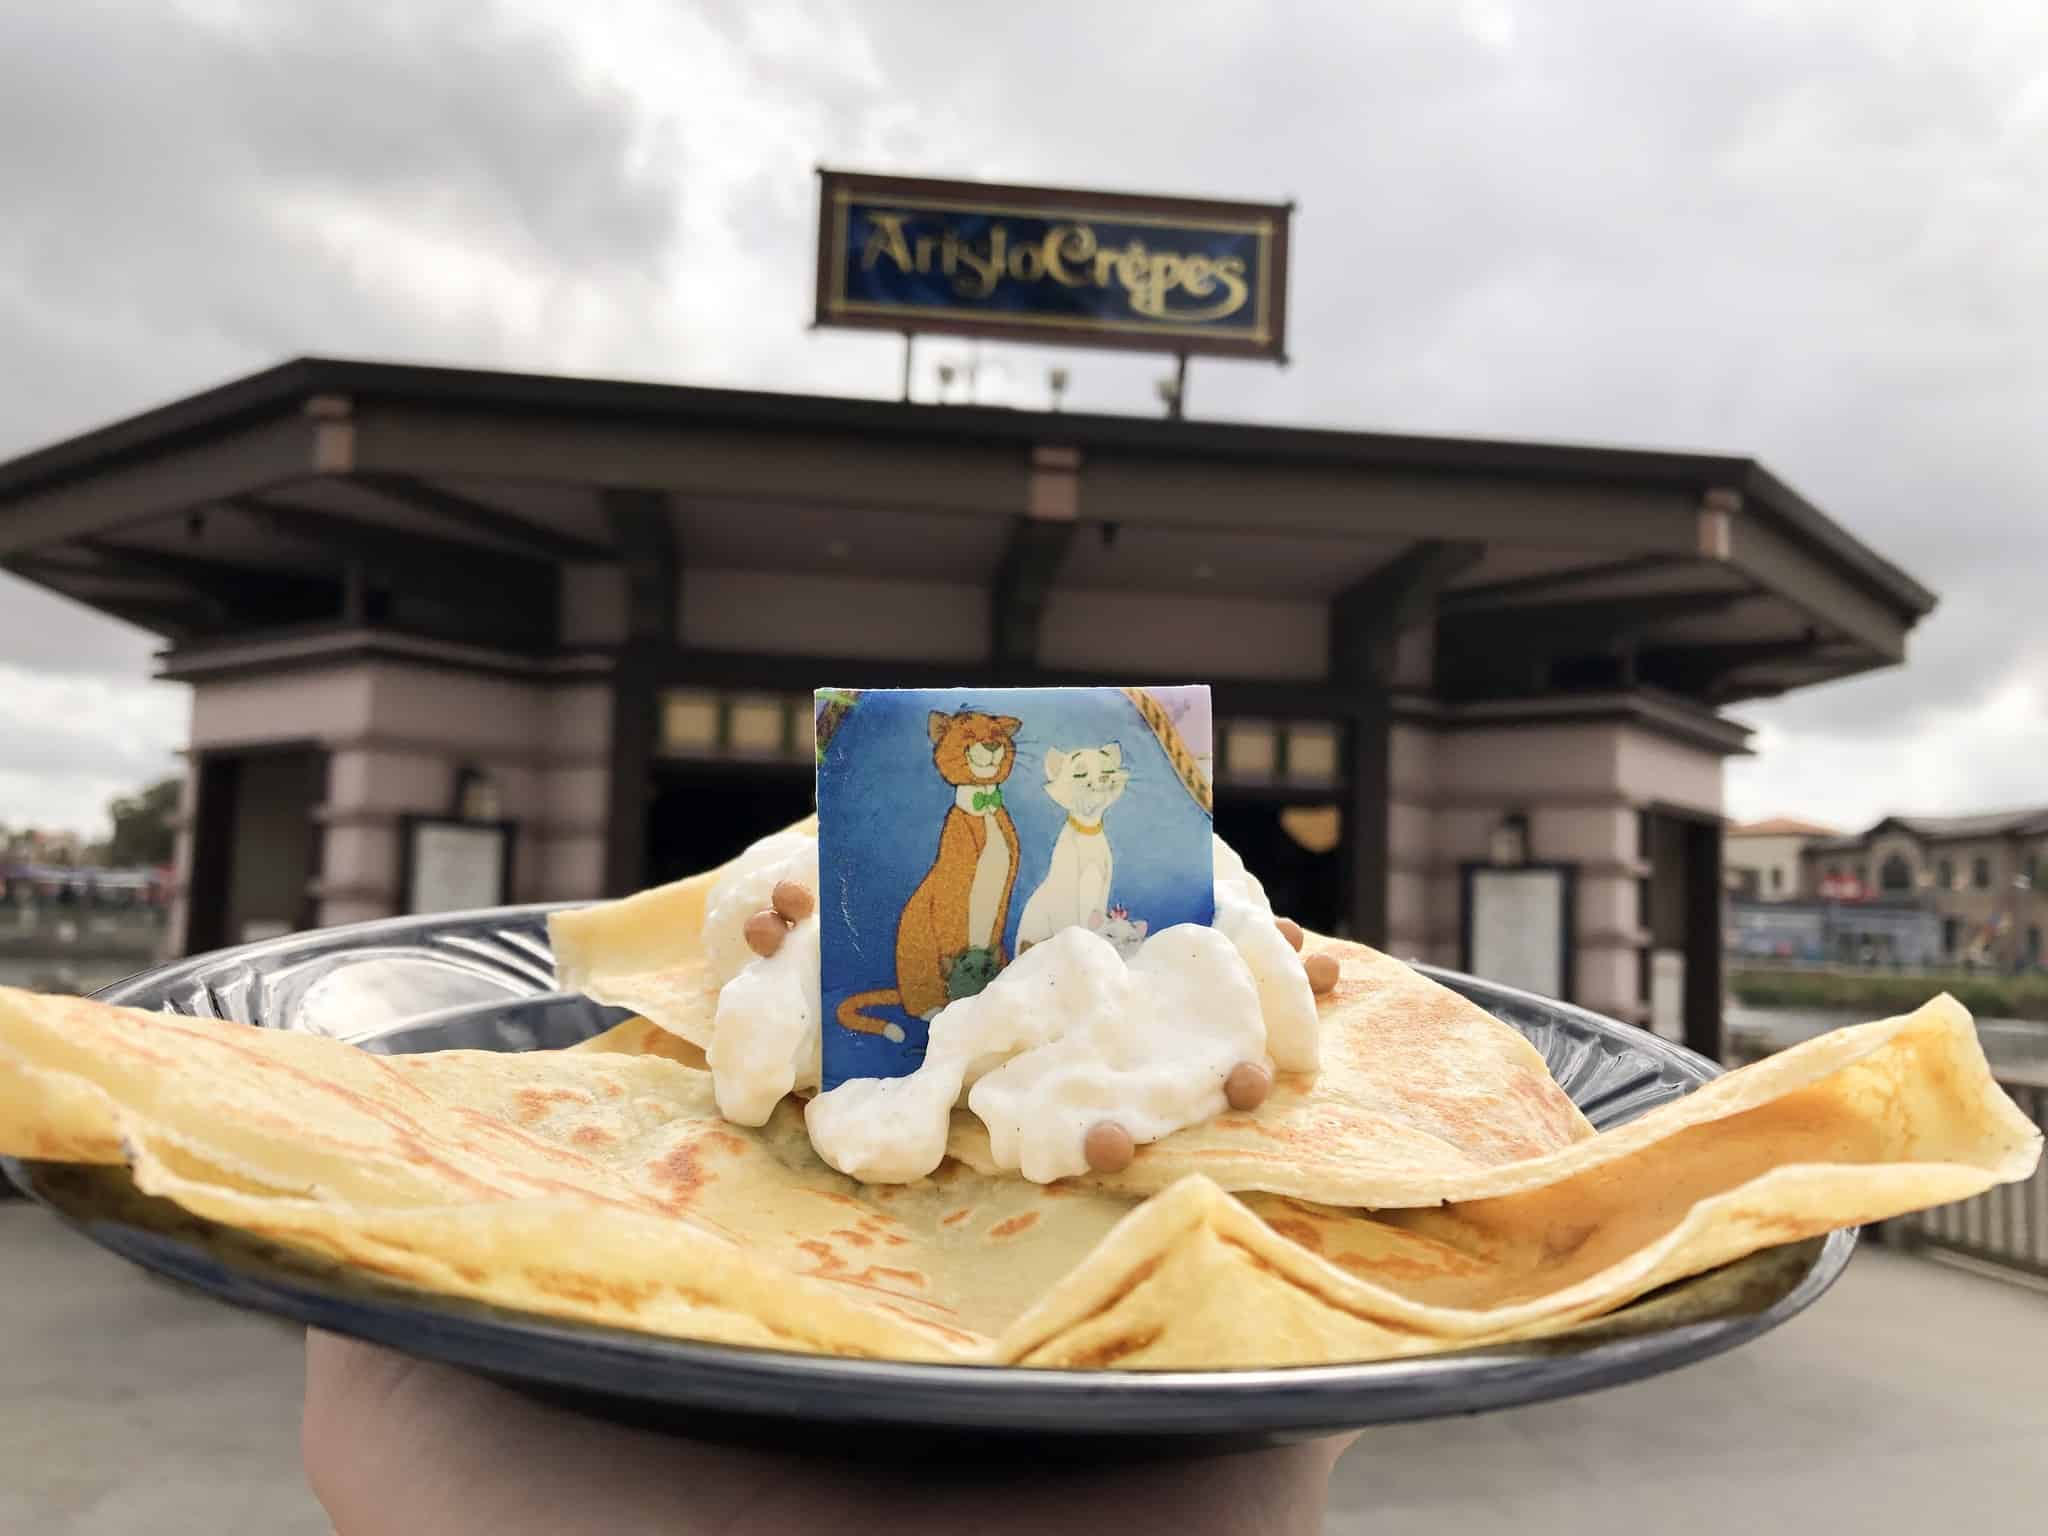 Aristocrepes specialty crepe